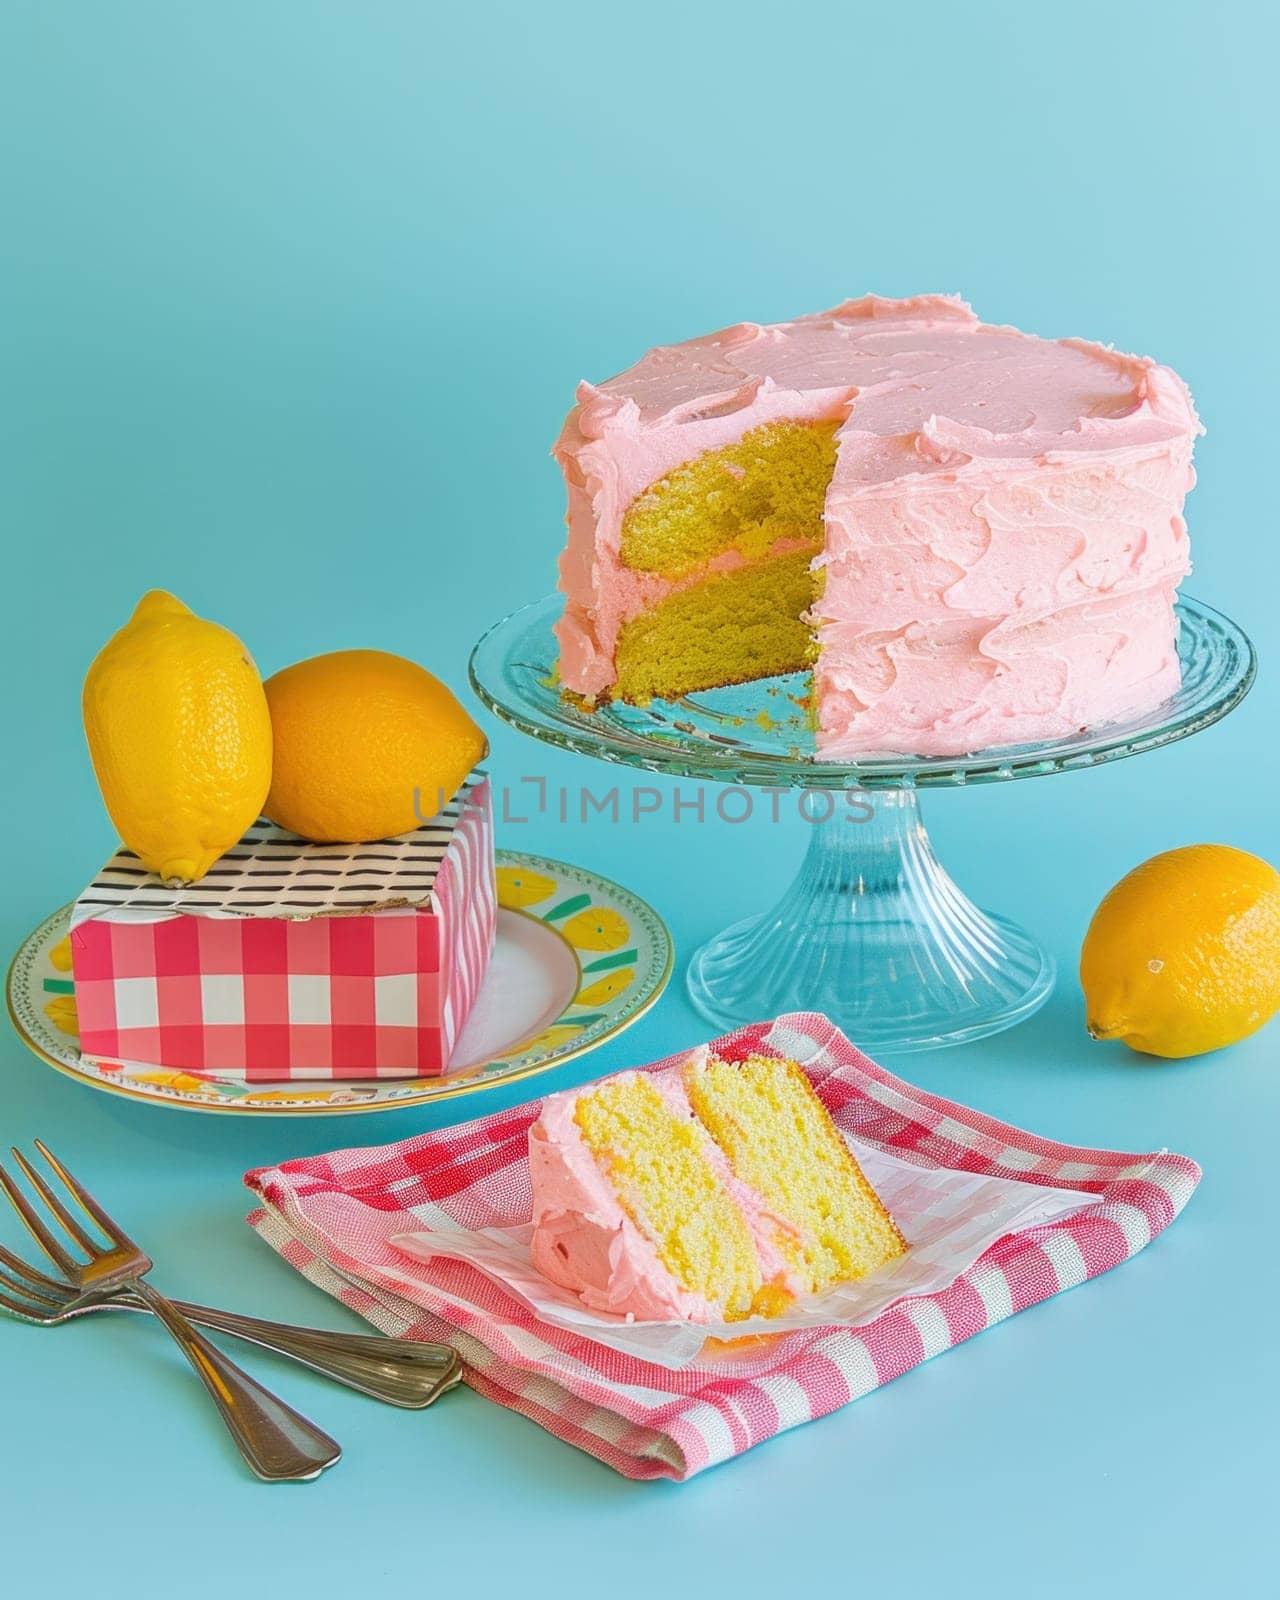 Delicious slice of cake with lemon slices on plate for traveling foodies and gourmets